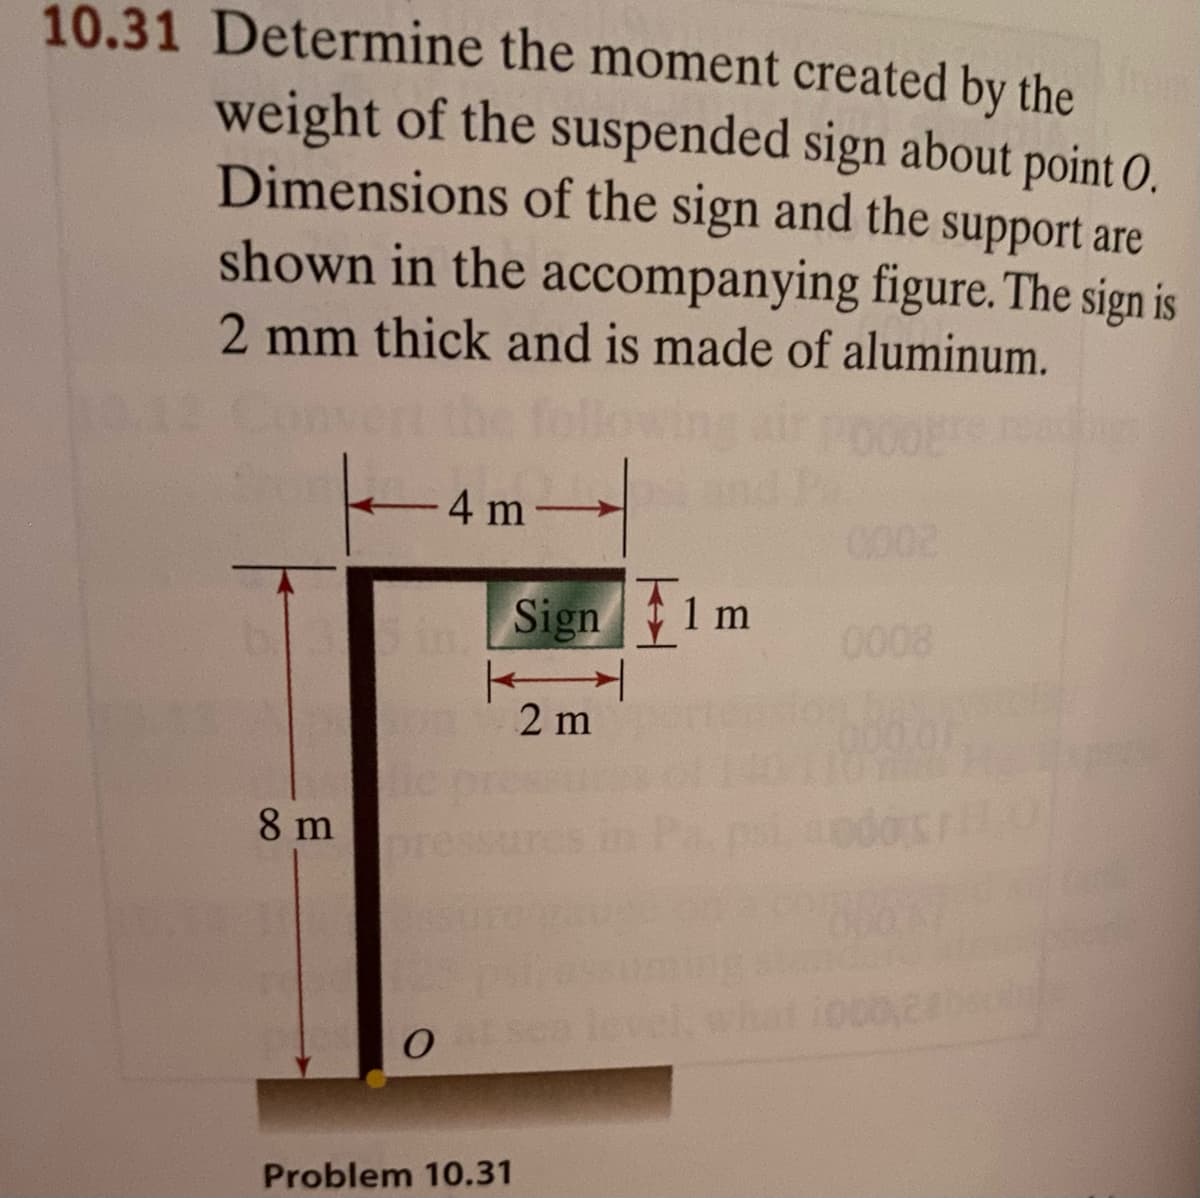 10.31 Determine the moment created by the
weight of the suspended sign about point O.
Dimensions of the sign and the support are
shown in the accompanying figure. The sign is
2 mm thick and is made of aluminum.
4 m
0002
in
Sign 1 m
0008
2 m
8 m
pr
leve
Problem 10.31
